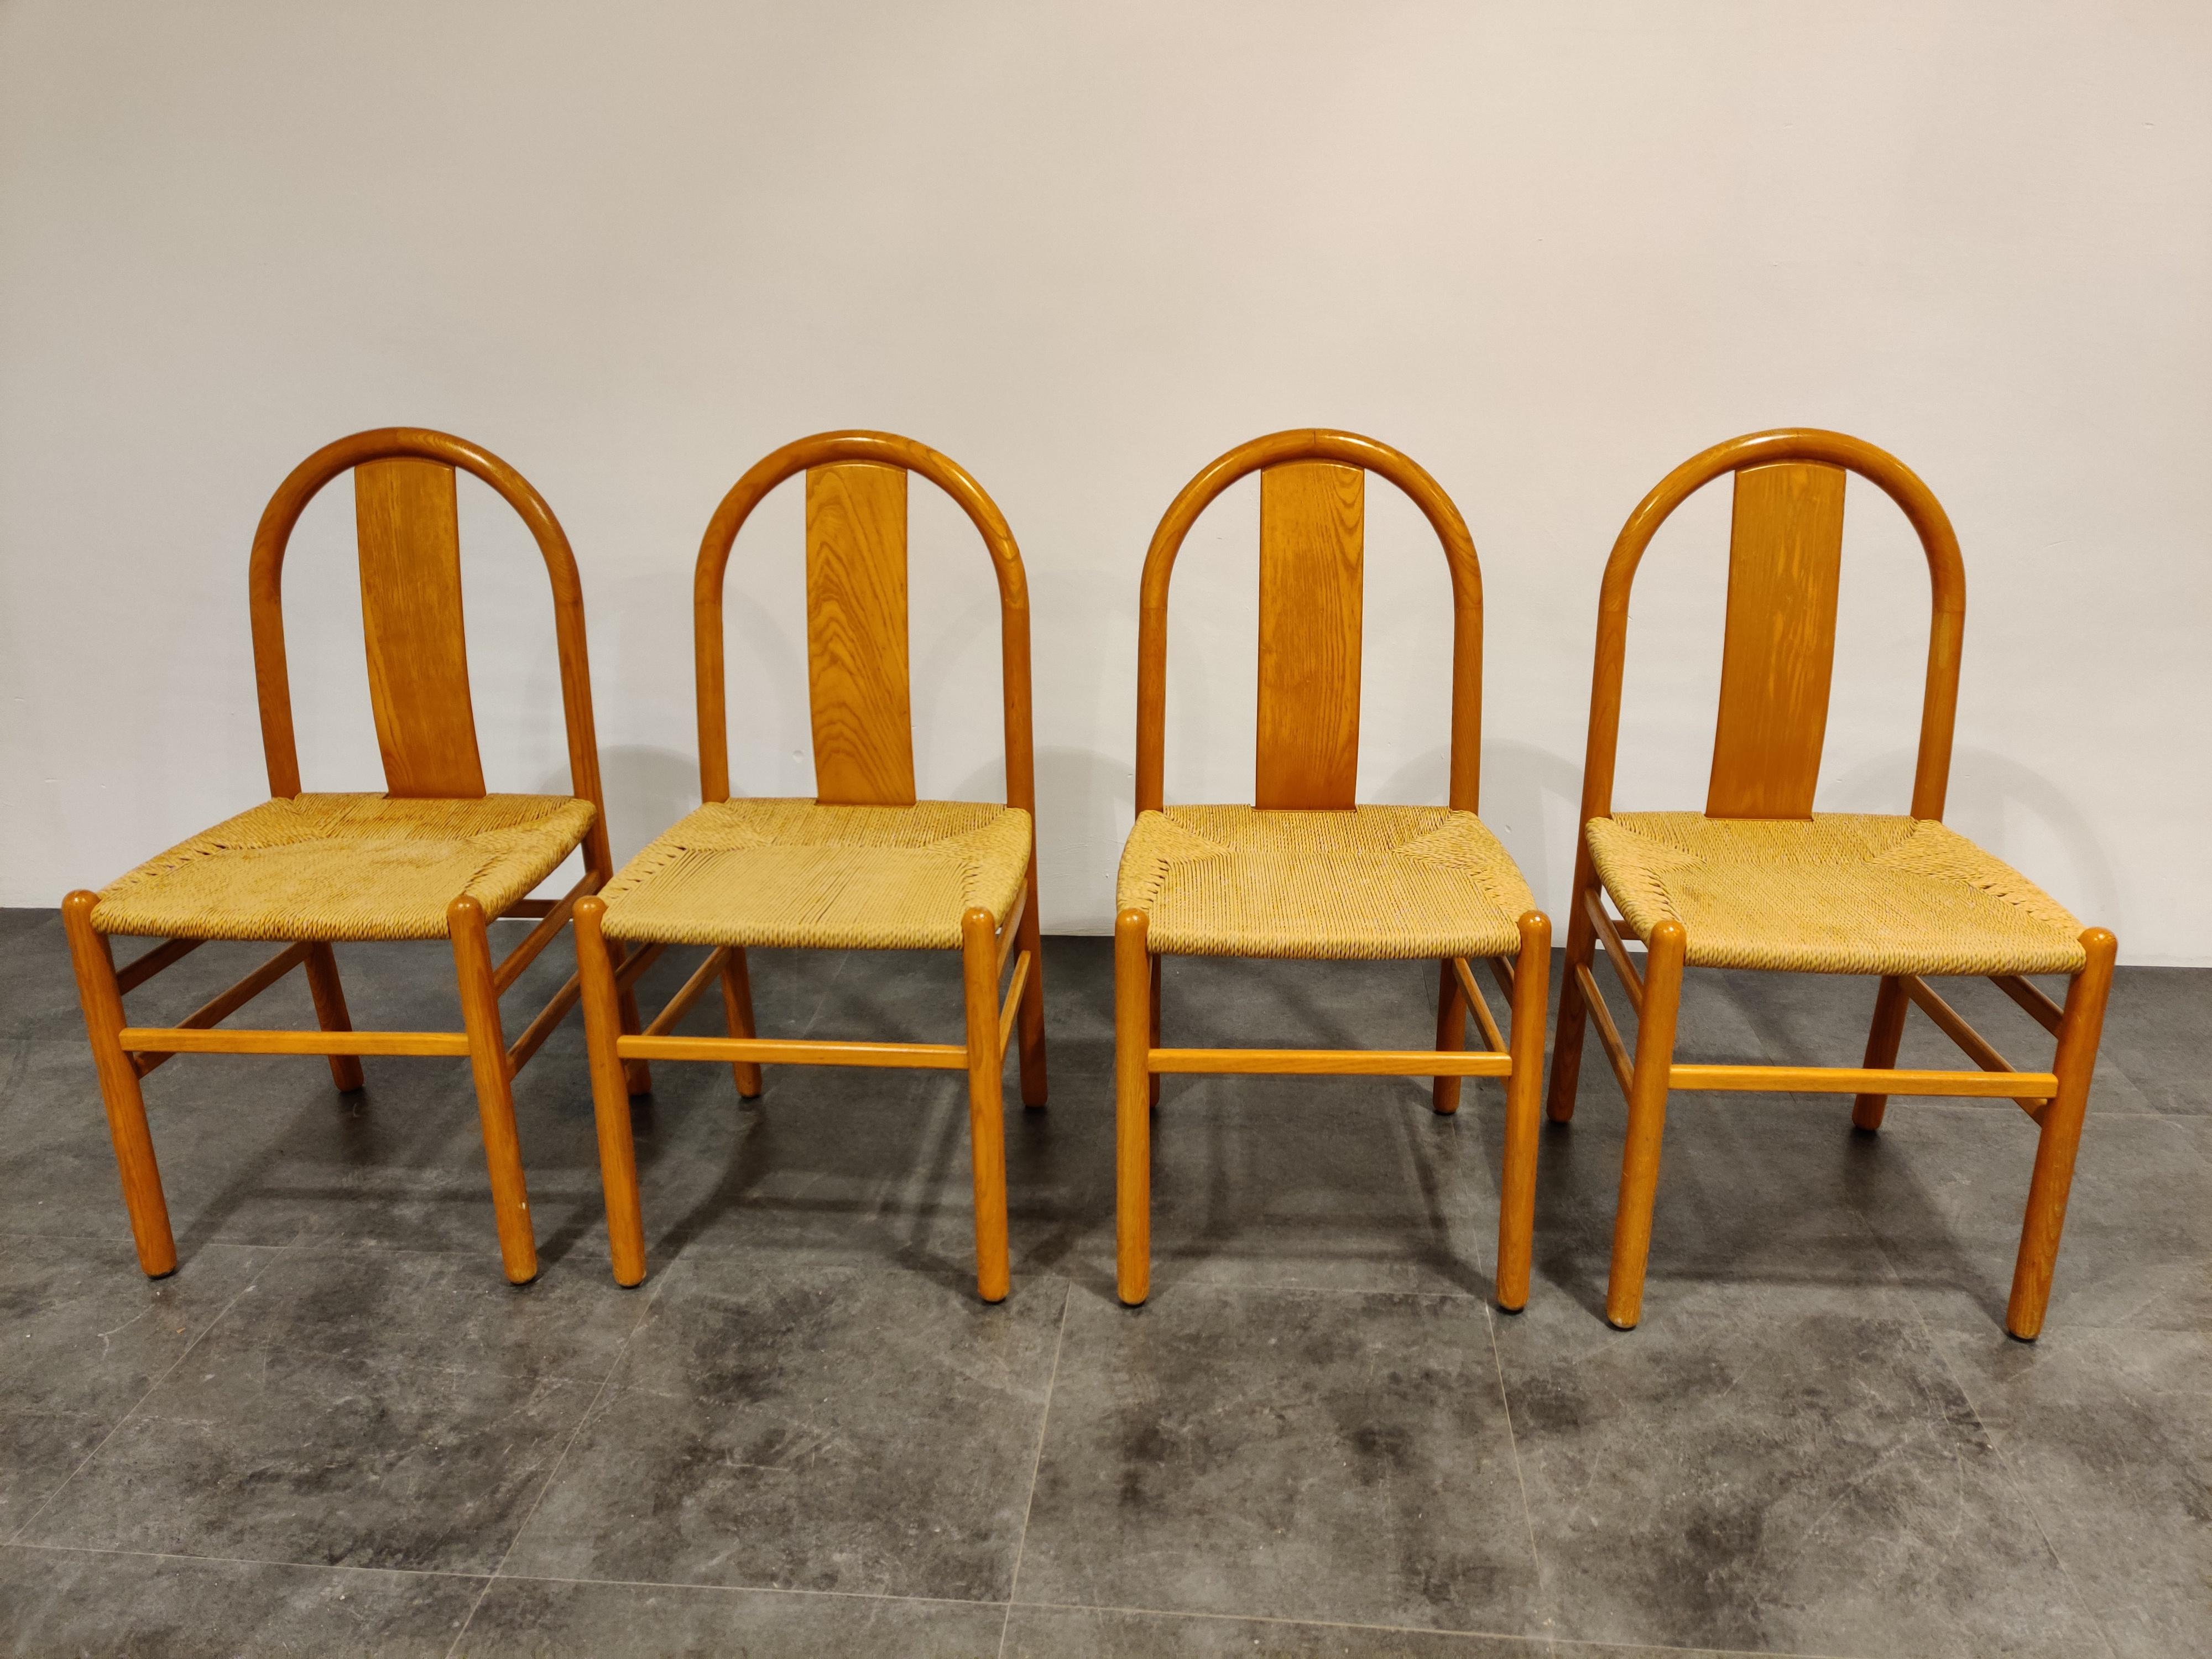 Set of 4 Scandinavian dining chairs with paper cord seats.

Beautiful, quality dining chairs with eye for detail and craftsmanship.

Original seats in good condition.

Very charming set of chairs

Designer unknown, probably Danish

1960s, Denmark